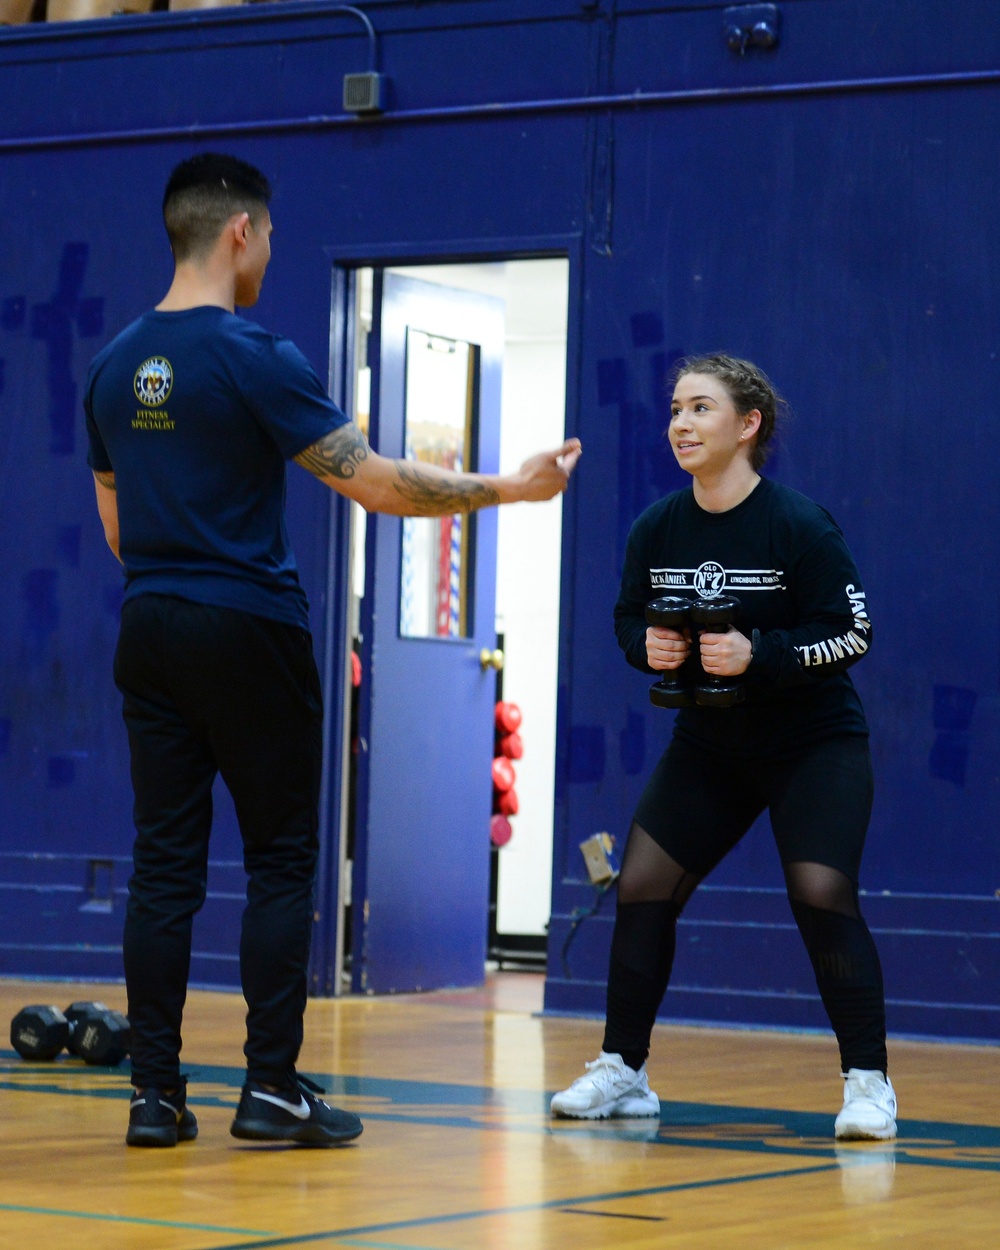 Sailors and PSNS Workers Participate in Warrior Workouts